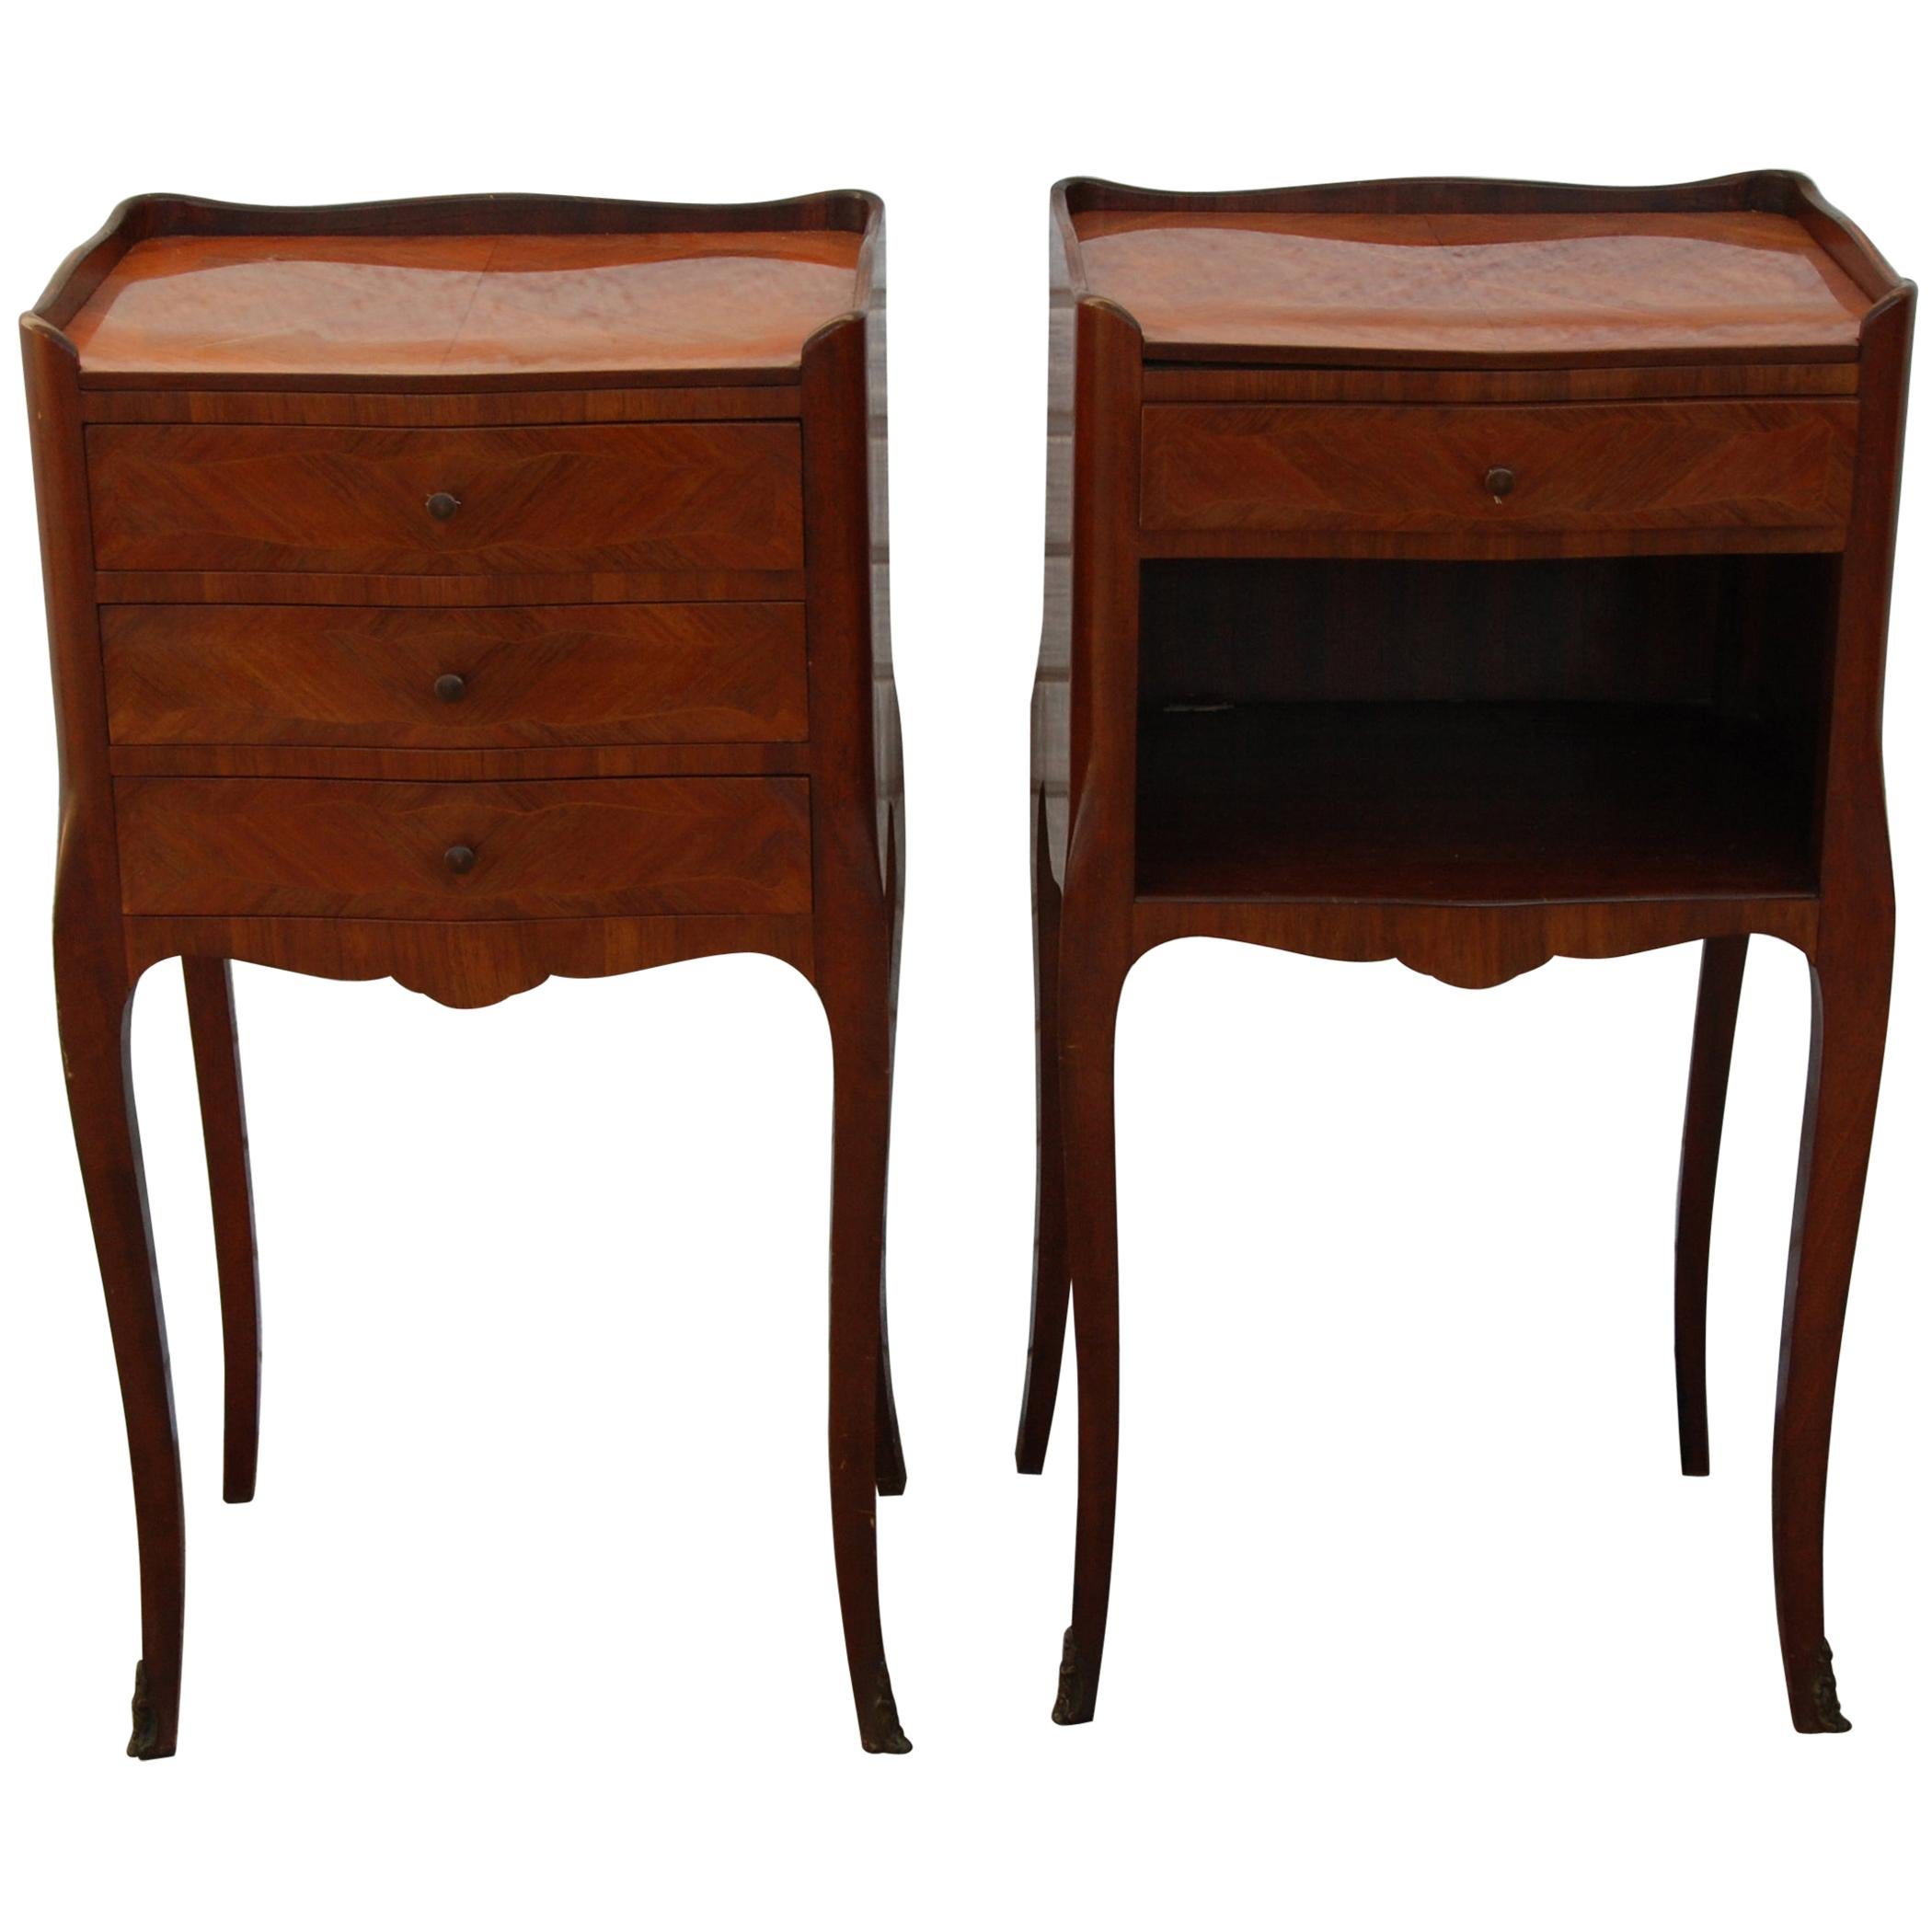 Pair of Traditional Mahogany Nightstands with Marquetry and Queen Anne Legs